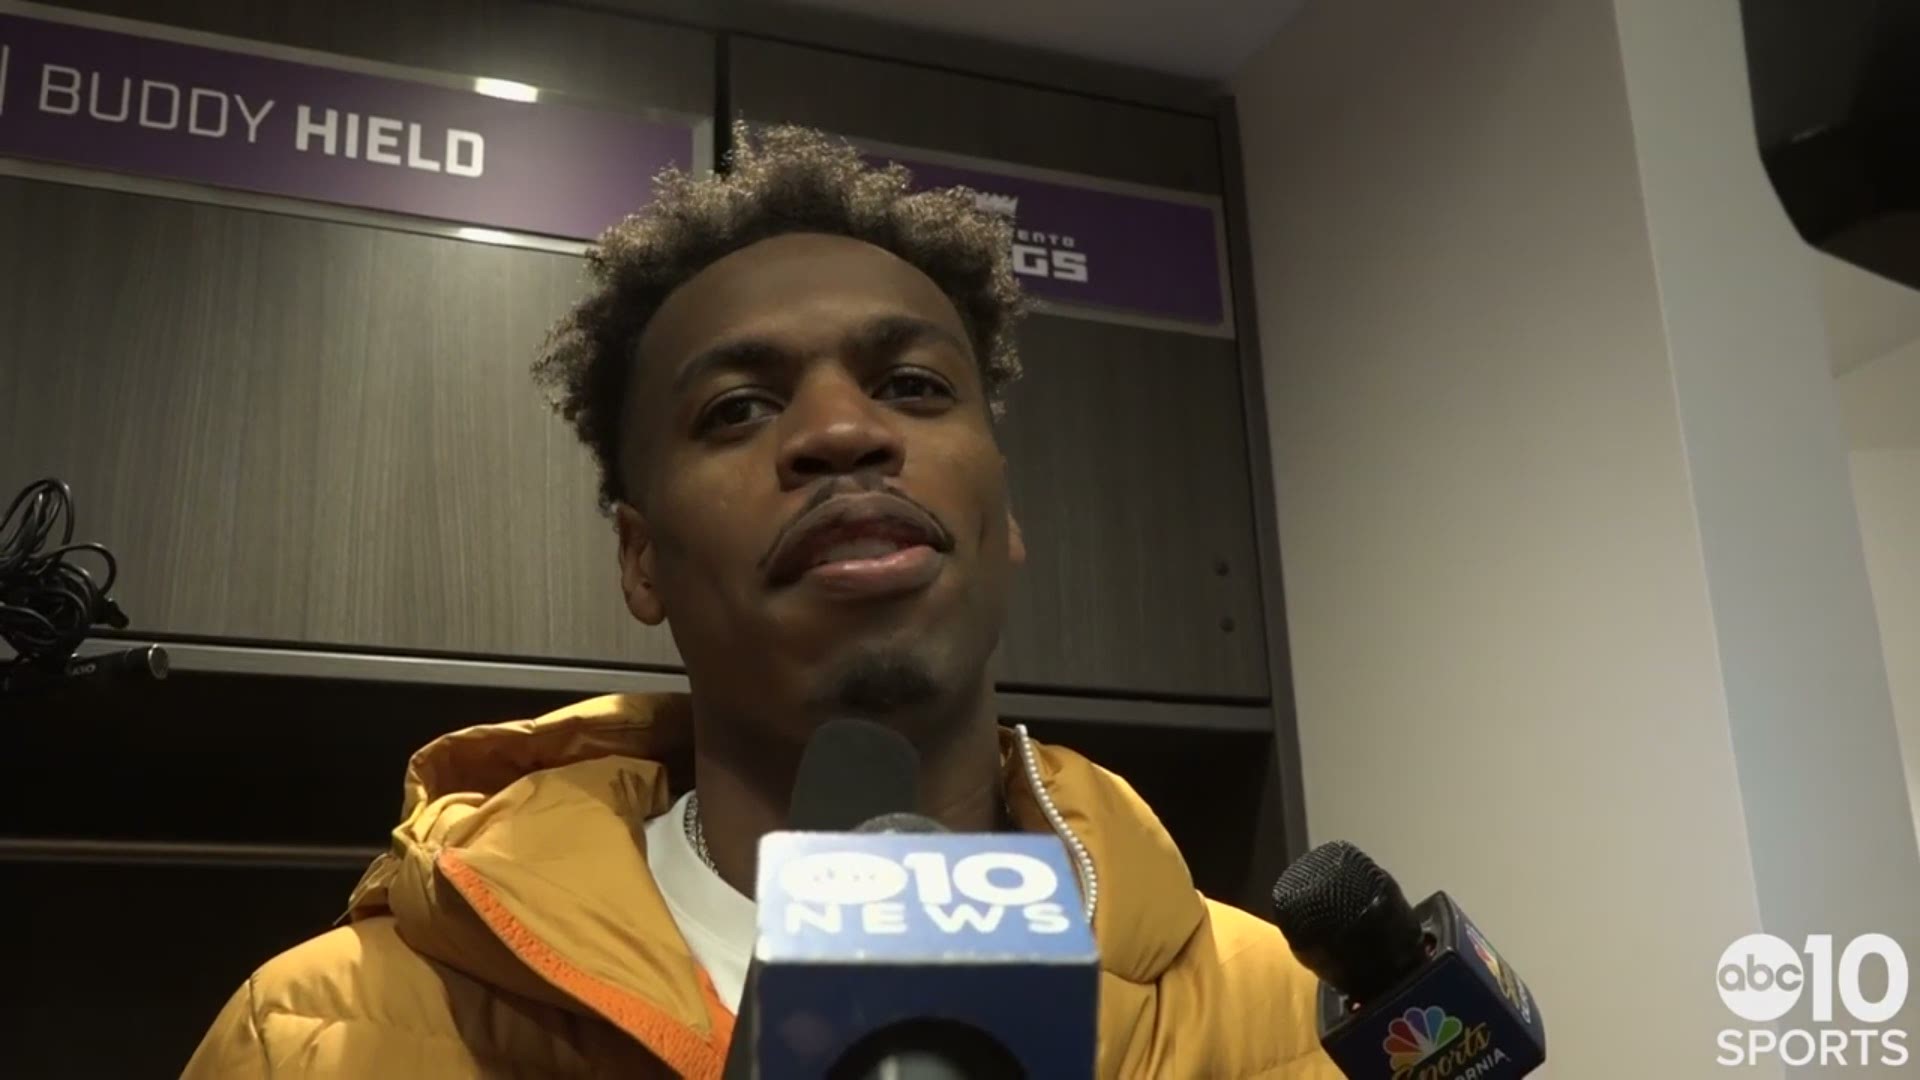 Kings shooting guard Buddy Hield discusses Saturday's overtime thriller, where he helped lead Sacramento to a 100-97 victory in overtime over the Denver Nuggets.